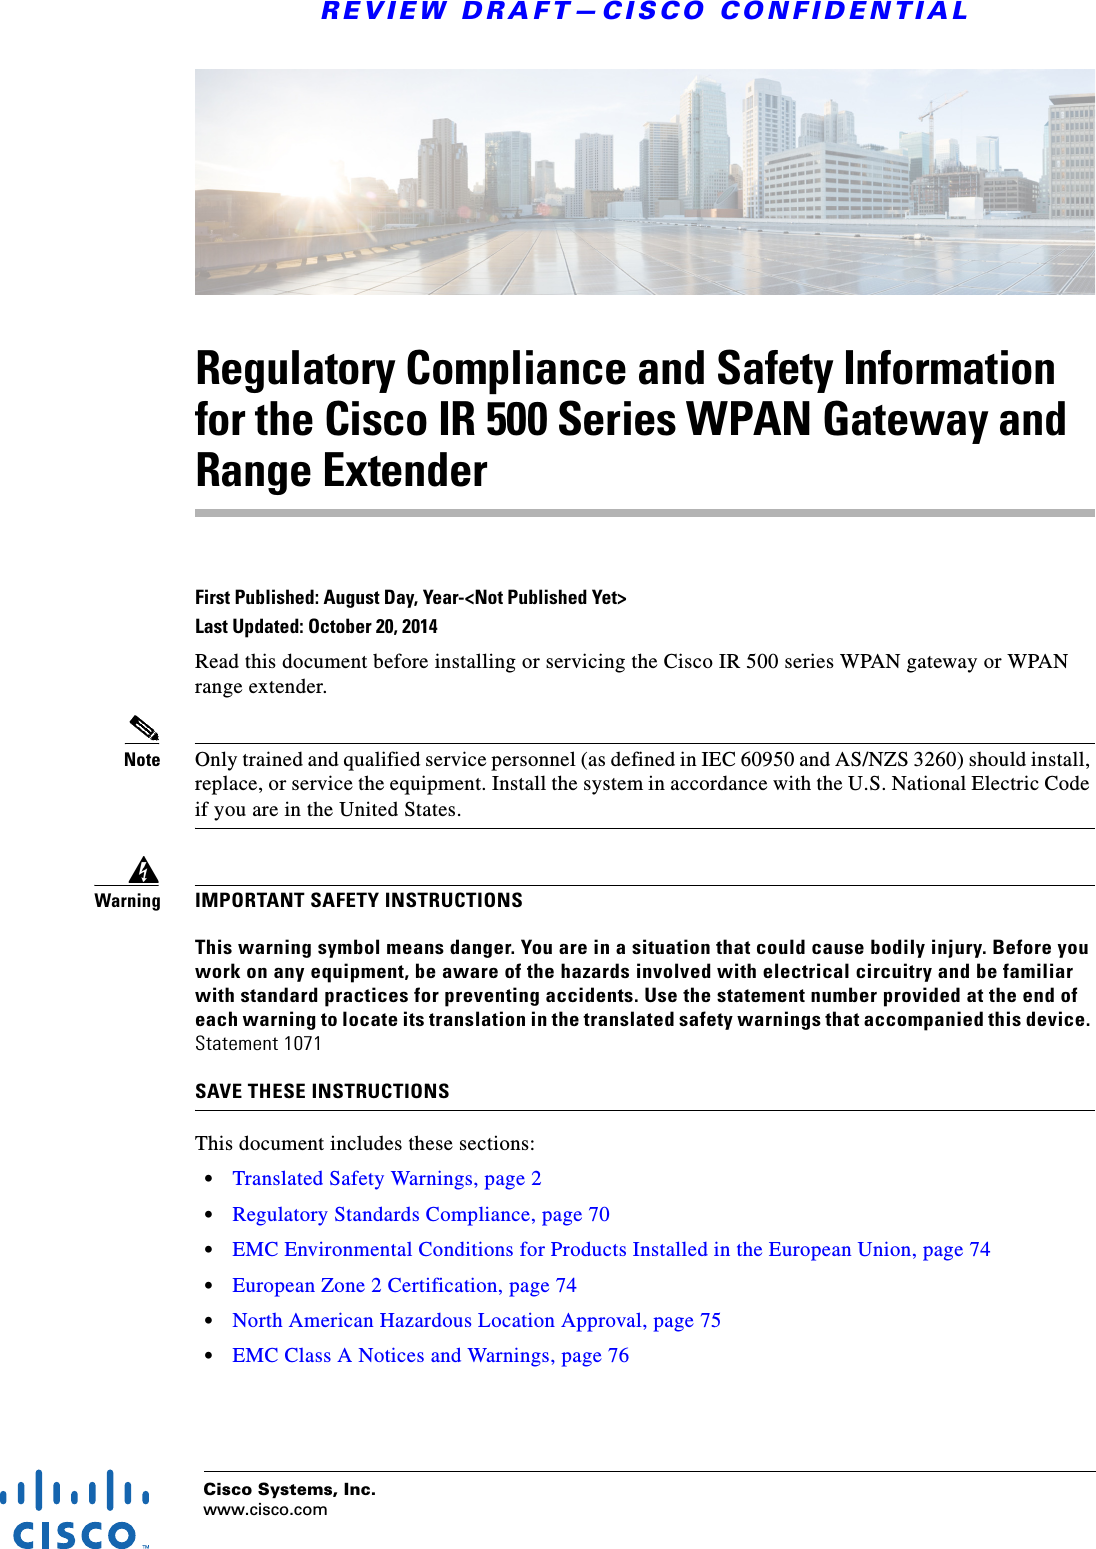 Cisco Systems, Inc.www.cisco.comREVIEW DRAFT—CISCO CONFIDENTIALRegulatory Compliance and Safety Information for the Cisco IR 500 Series WPAN Gateway and Range ExtenderFirst Published: August Day, Year-&lt;Not Published Yet&gt;Last Updated: October 20, 2014Read this document before installing or servicing the Cisco IR 500 series WPAN gateway or WPAN range extender.Note Only trained and qualified service personnel (as defined in IEC 60950 and AS/NZS 3260) should install, replace, or service the equipment. Install the system in accordance with the U.S. National Electric Code if you are in the United States.WarningIMPORTANT SAFETY INSTRUCTIONSThis warning symbol means danger. You are in a situation that could cause bodily injury. Before you work on any equipment, be aware of the hazards involved with electrical circuitry and be familiar with standard practices for preventing accidents. Use the statement number provided at the end of each warning to locate its translation in the translated safety warnings that accompanied this device. Statement 1071SAVE THESE INSTRUCTIONSThis document includes these sections:•Translated Safety Warnings, page 2•Regulatory Standards Compliance, page 70•EMC Environmental Conditions for Products Installed in the European Union, page 74•European Zone 2 Certification, page 74•North American Hazardous Location Approval, page 75•EMC Class A Notices and Warnings, page 76